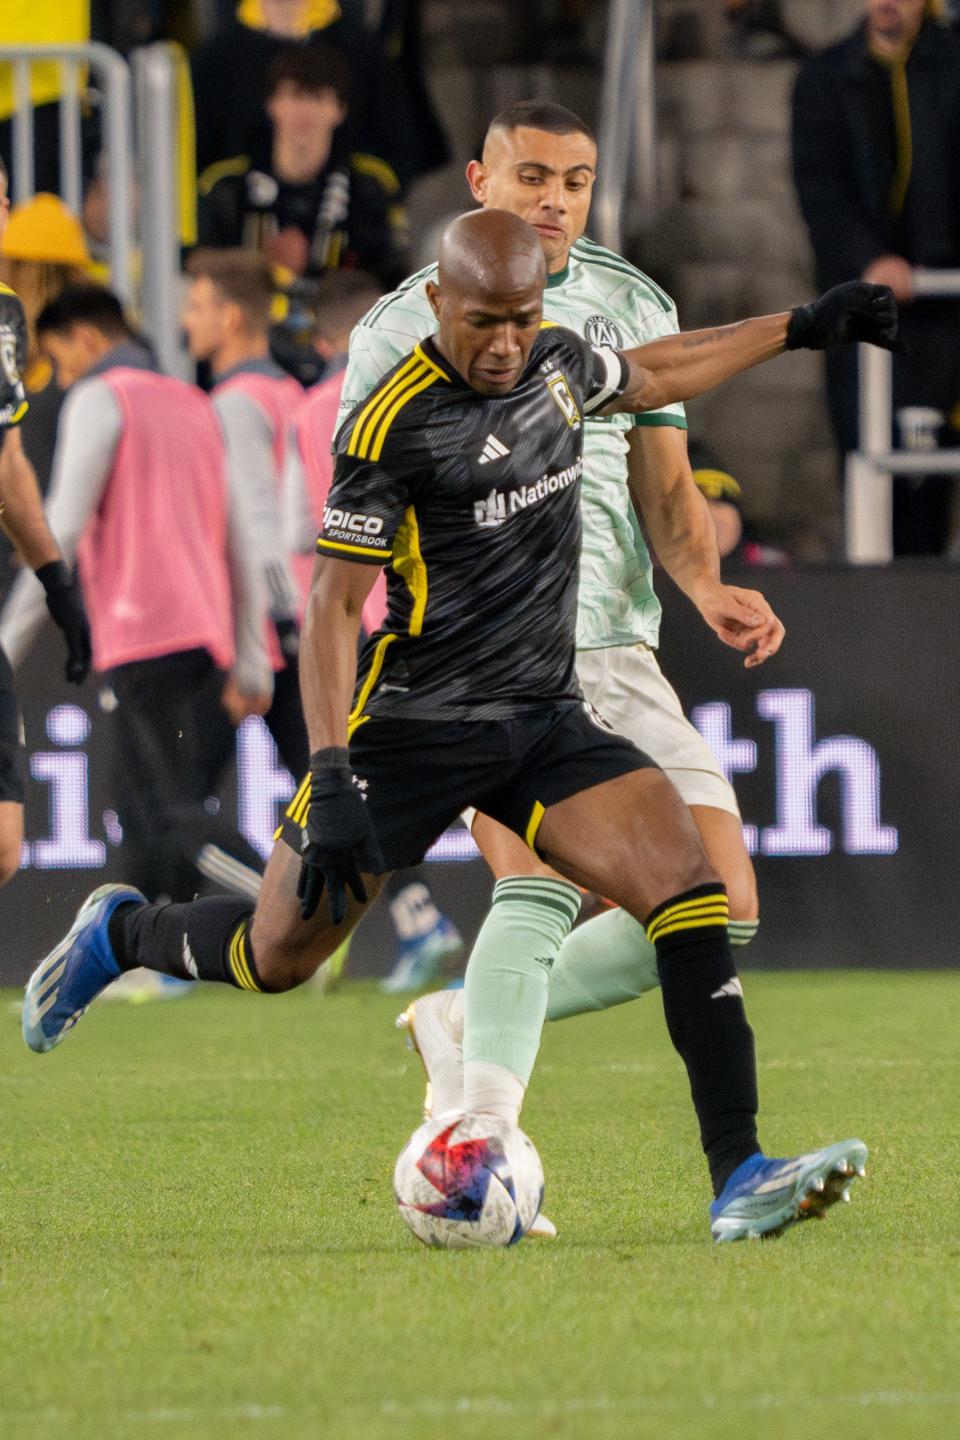 Midfielder Darlington Nagbe is one of three of the 11 starters who took the field for the Crew in their last game of the 2022 regular season, who remain with the club. The others are defender Steven Moreira and forward Cucho Hernandez.